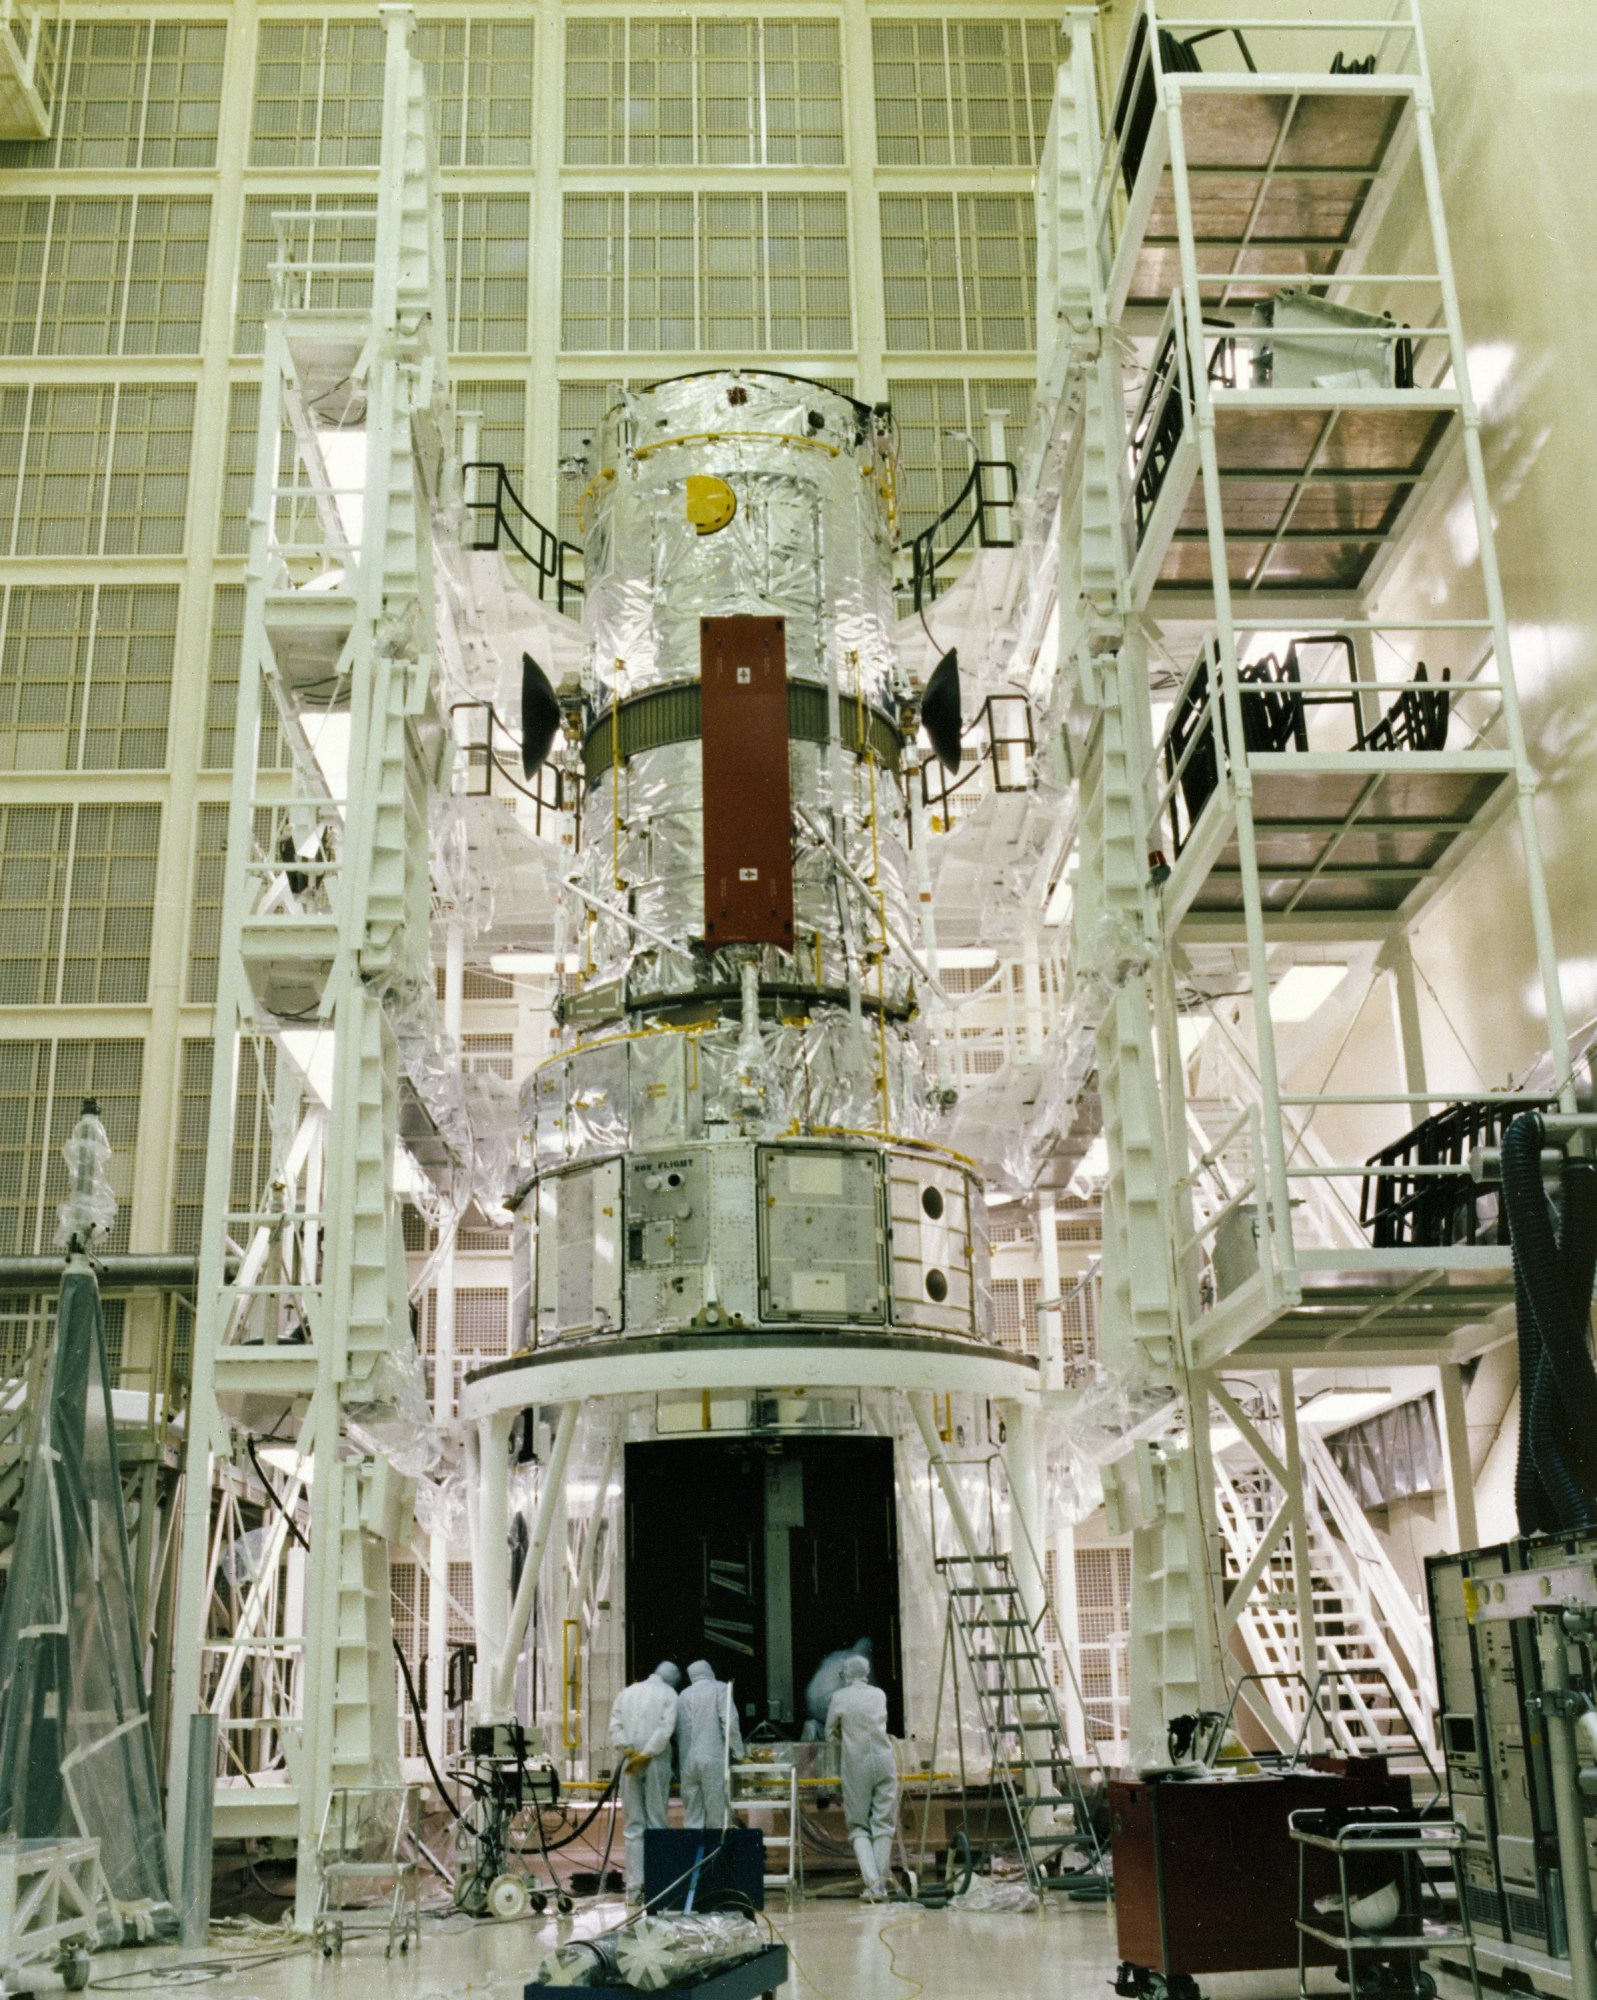 A partially constructed Hubble telescope is surrounded by scaffolding in a clean room. Technicians peer into a dark square opening at its base.